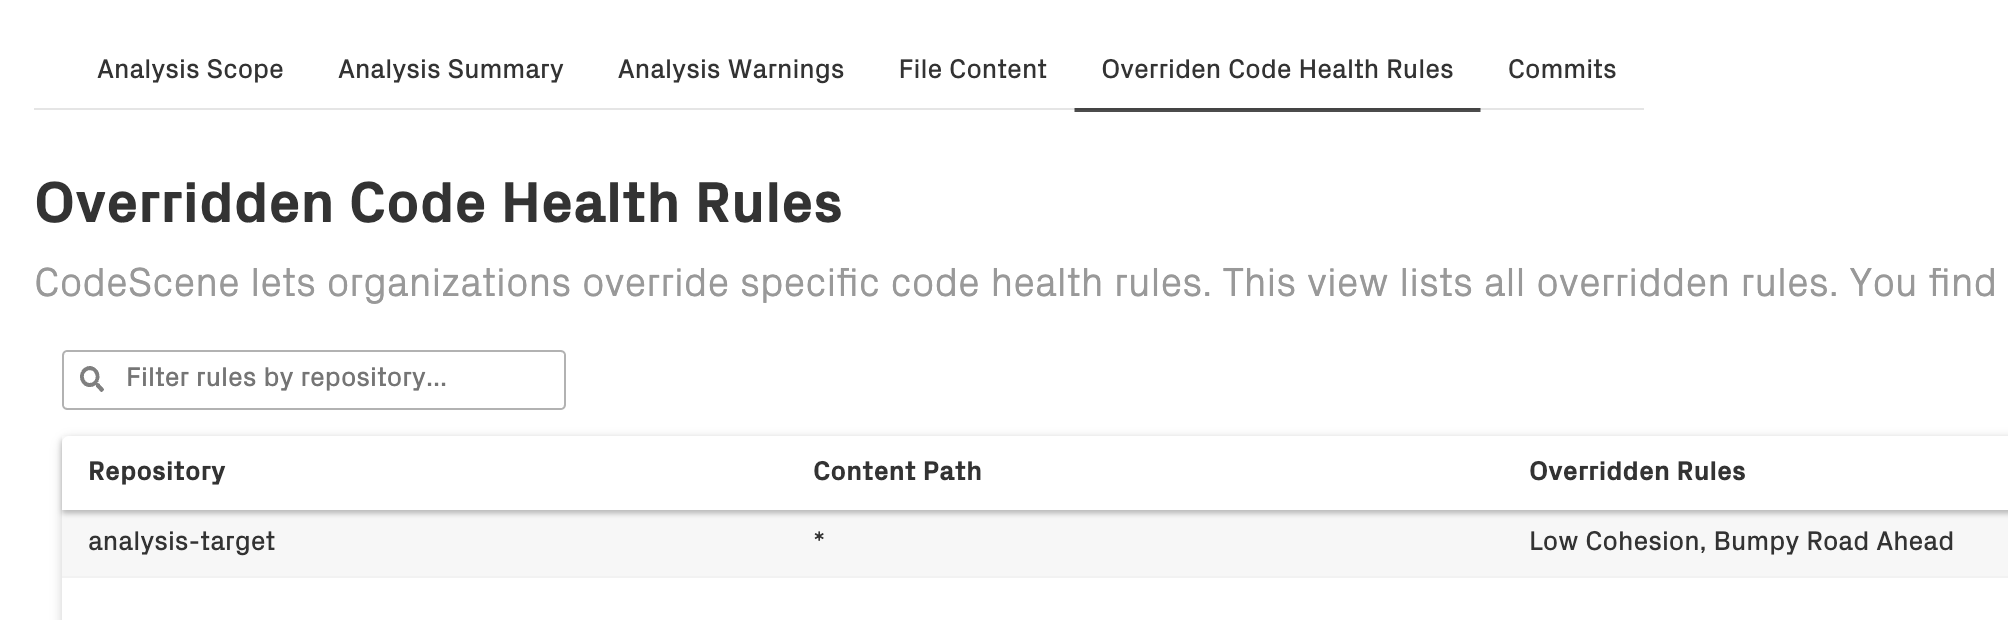 CodeScene presents a searchable summary of all overridden code health rules